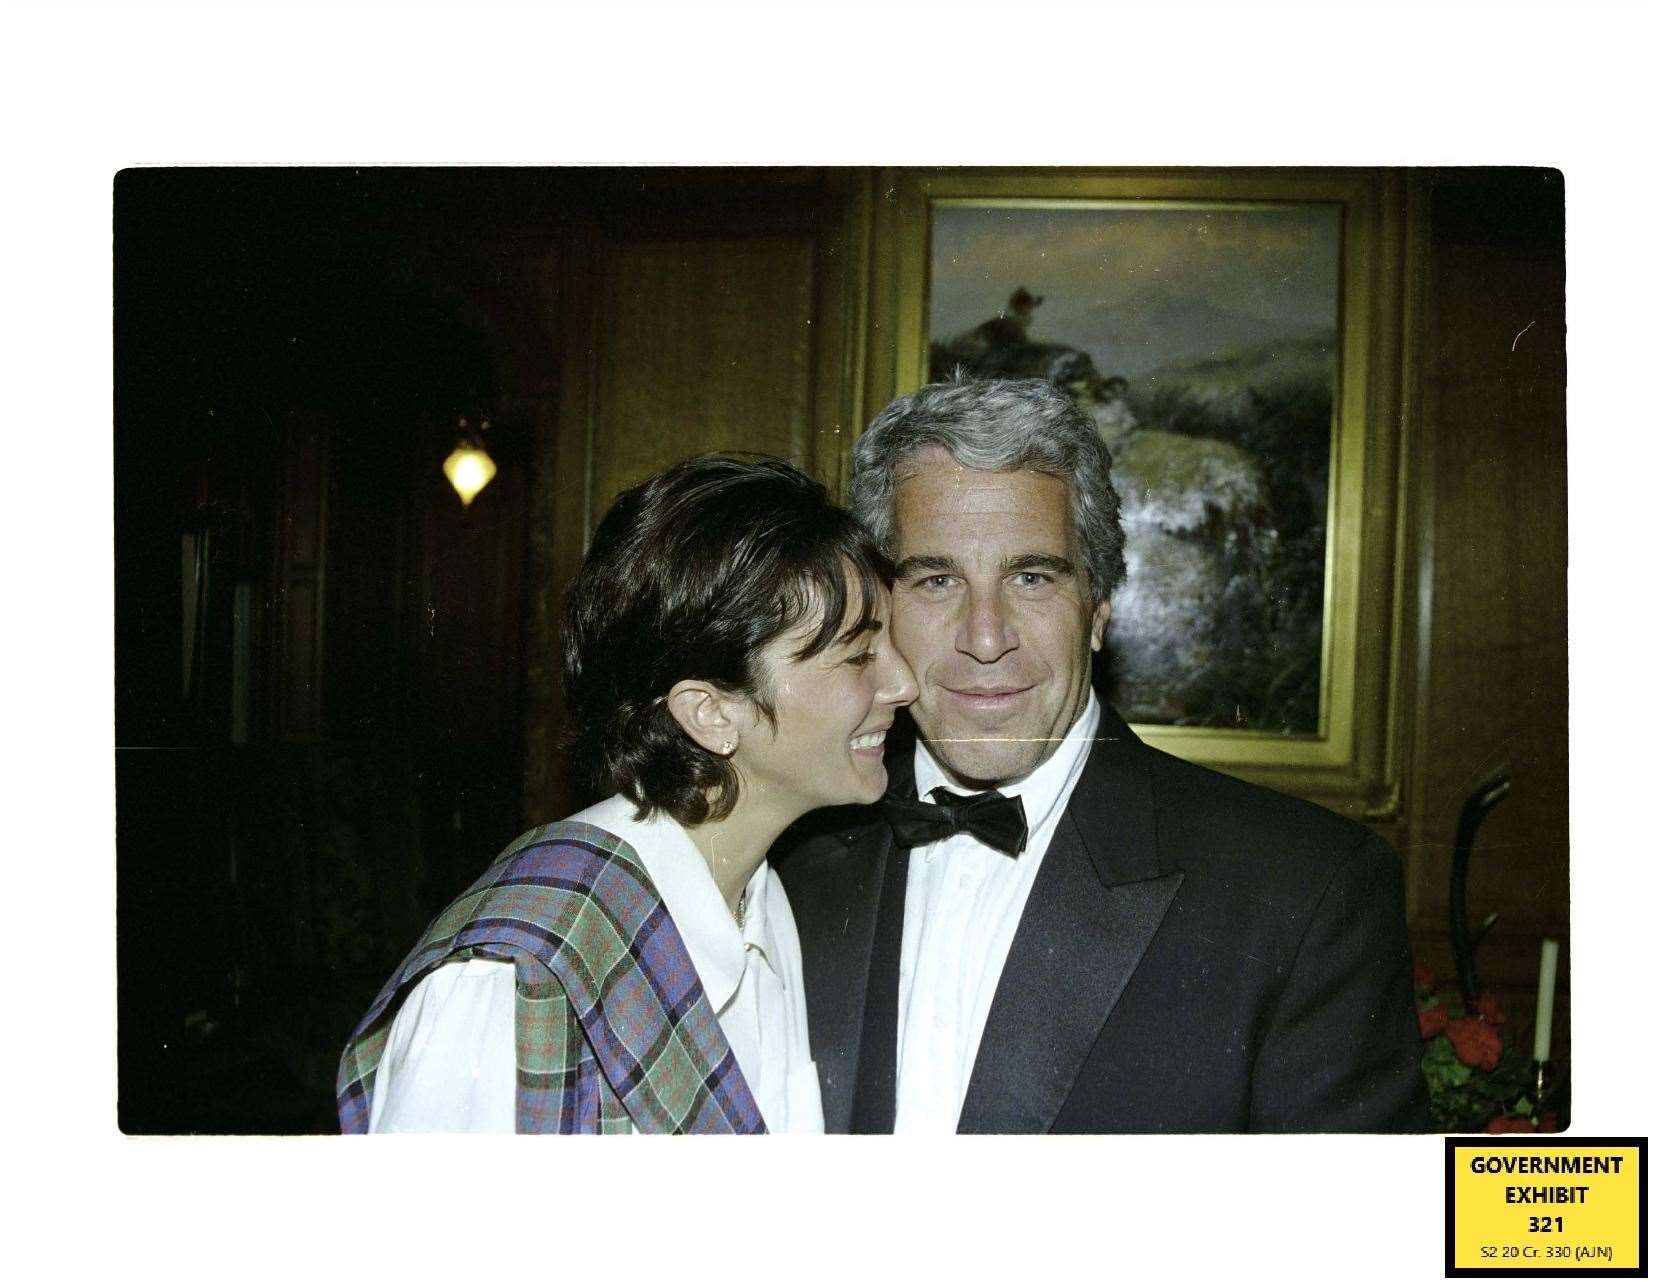 Epstein was quizzed over whether he and Maxwell forced Ms Giuffre to have sex with Andrew (US Department of Justice/PA)